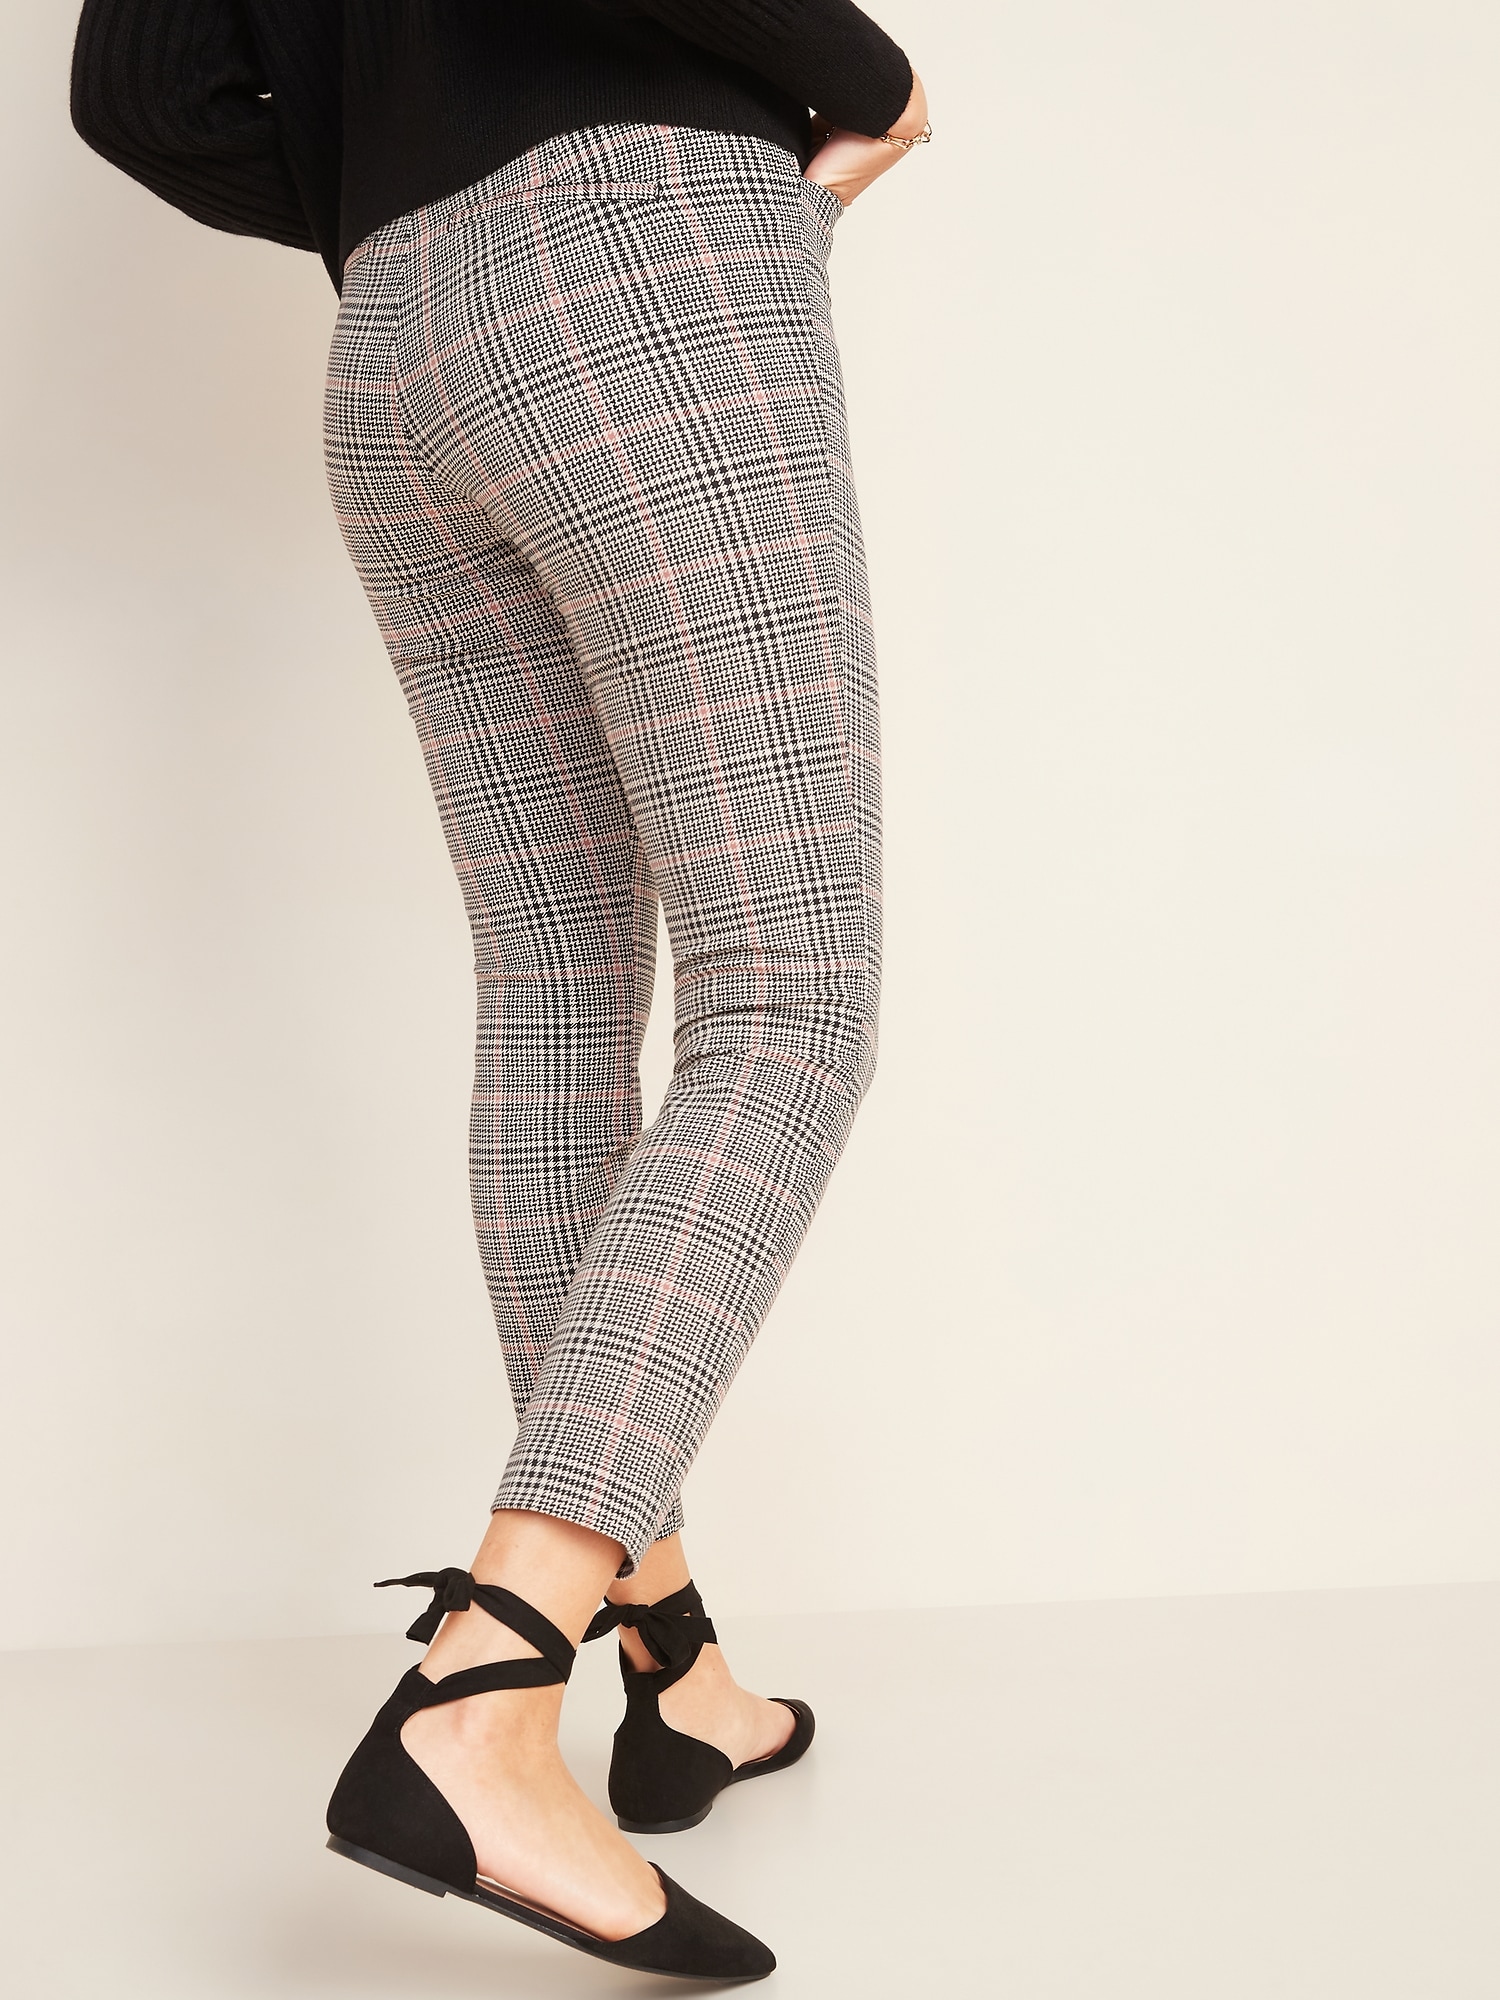 High-Waisted Patterned Pixie Skinny Ankle Pants for Women | Old Navy